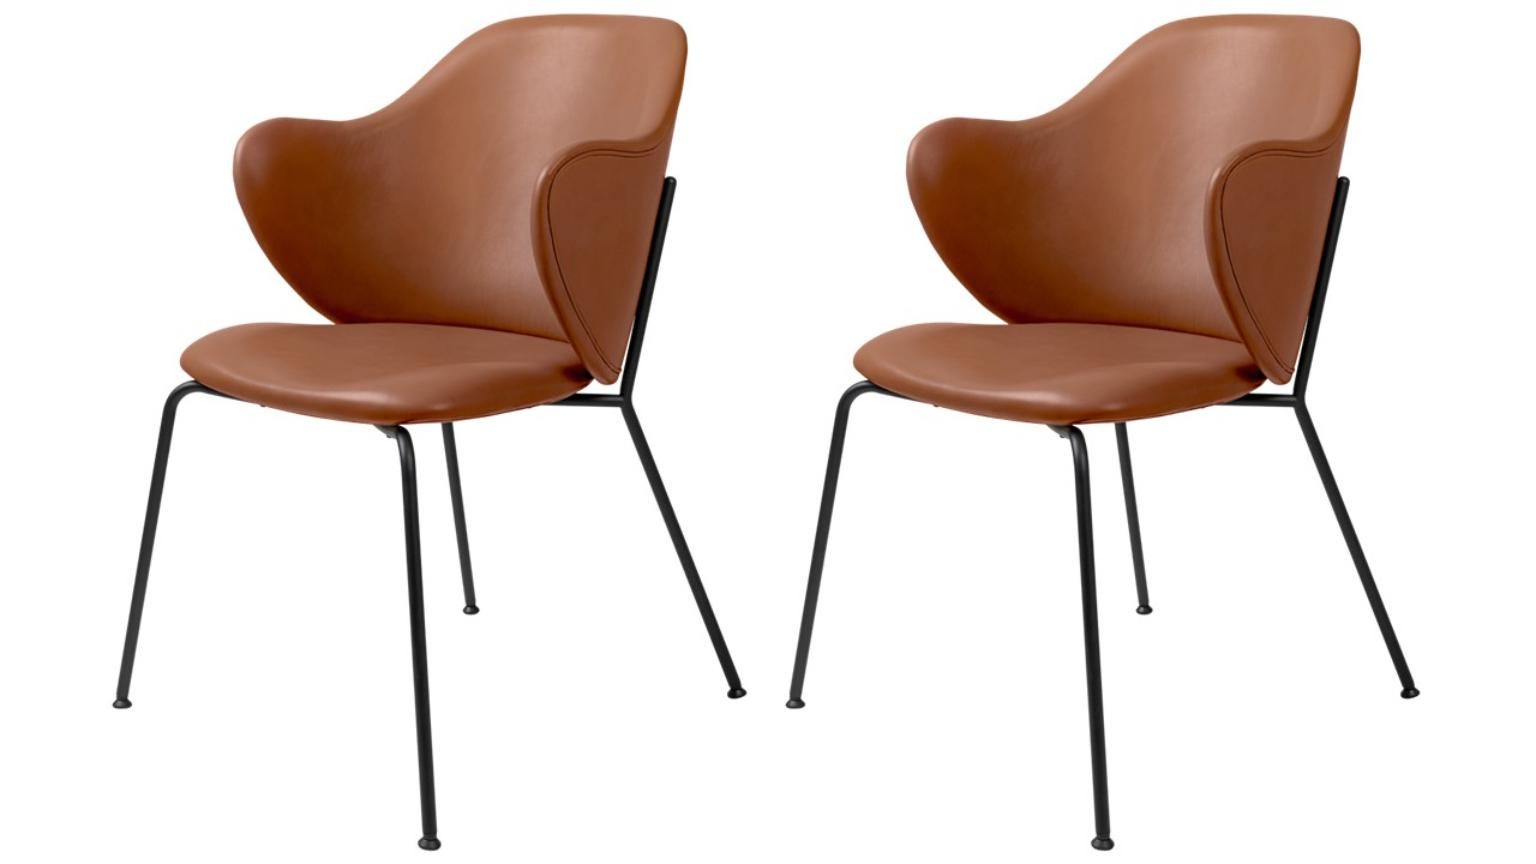 Set of 2 brown leather lassen chairs by Lassen
Dimensions: W 58 x D 60 x H 88 cm 
Materials: Leather

The Lassen chair by Flemming Lassen, Magnus Sangild and Marianne Viktor was launched in 2018 as an ode to Flemming Lassen’s uncompromising